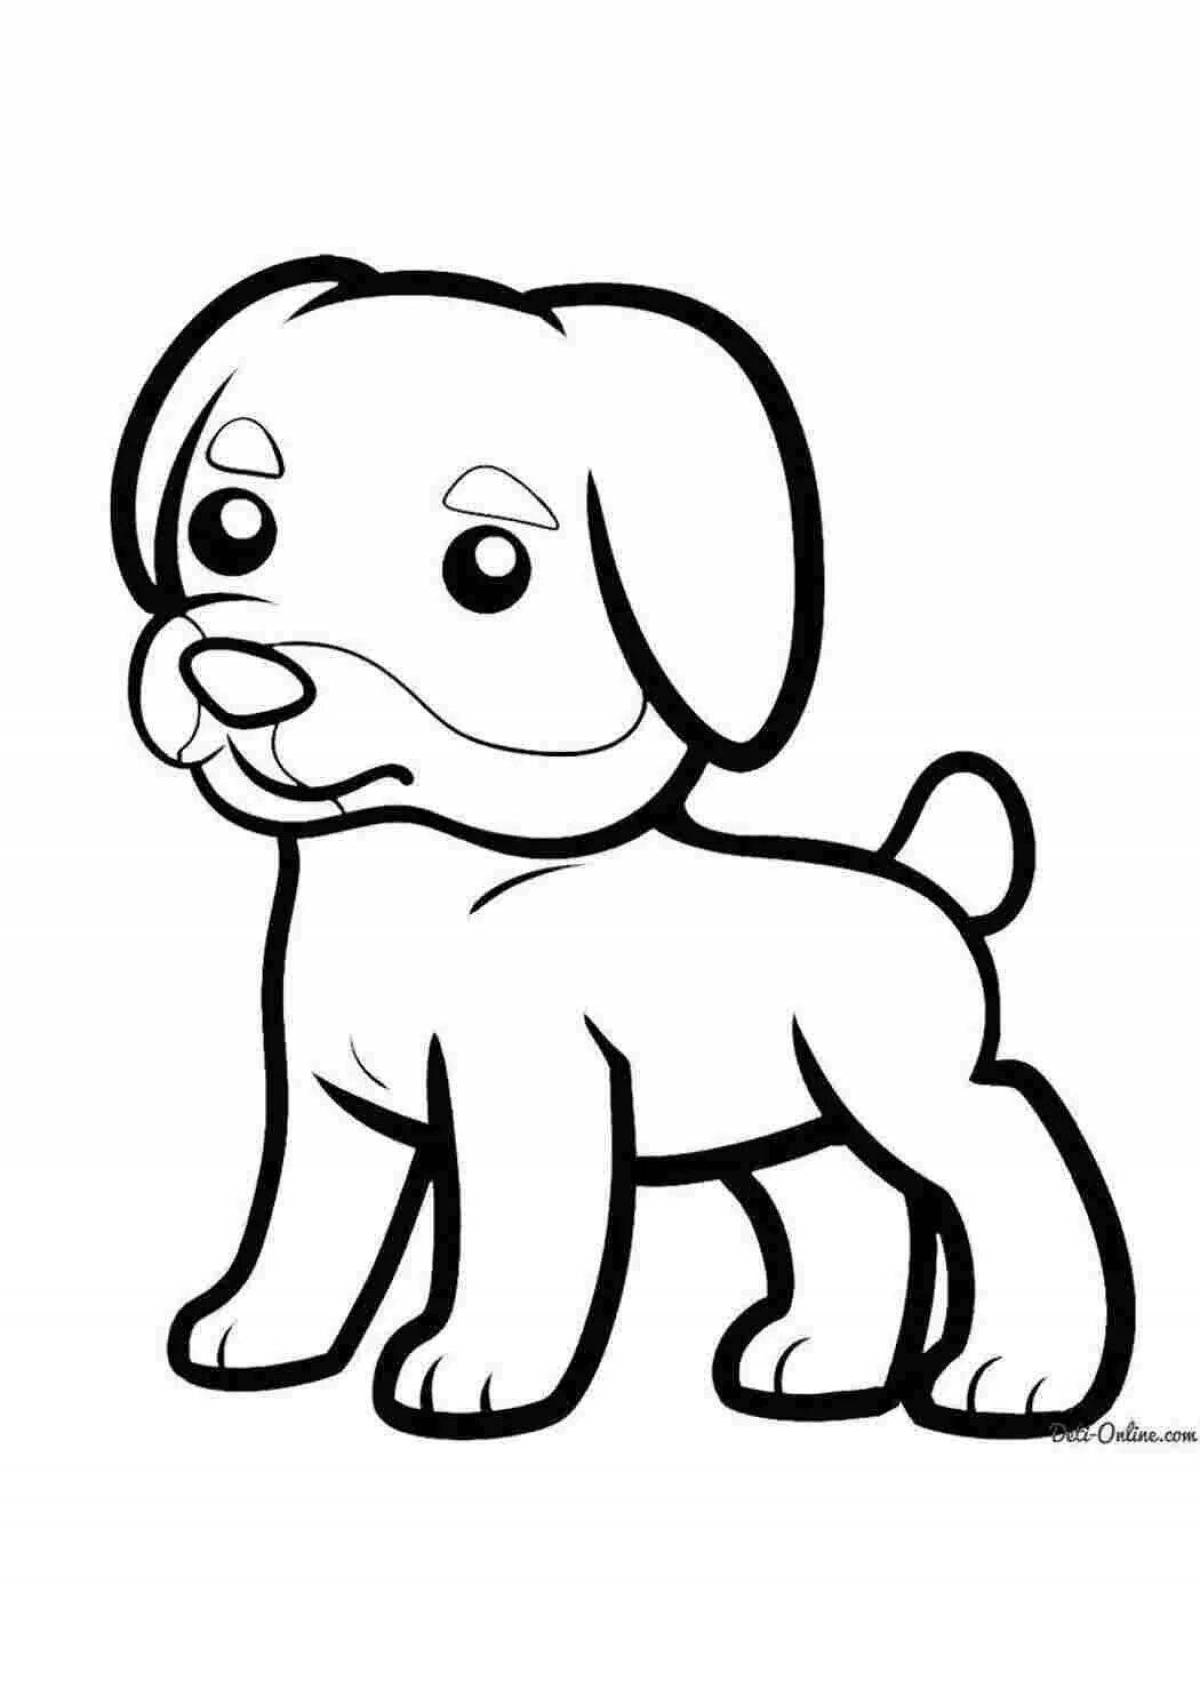 Fancy drawing of a dog for kids